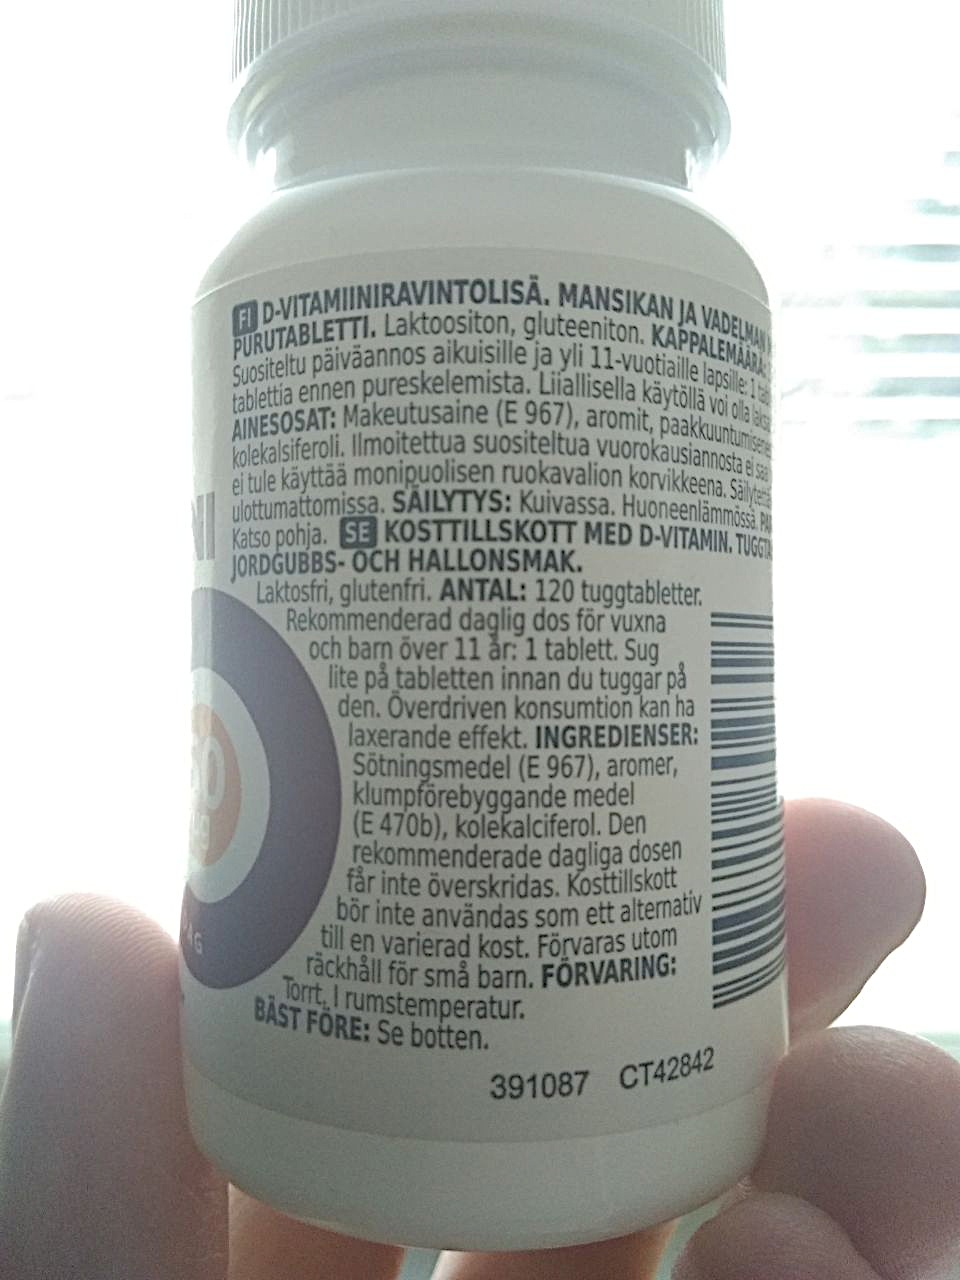 The same bottle of vitamins from the back.